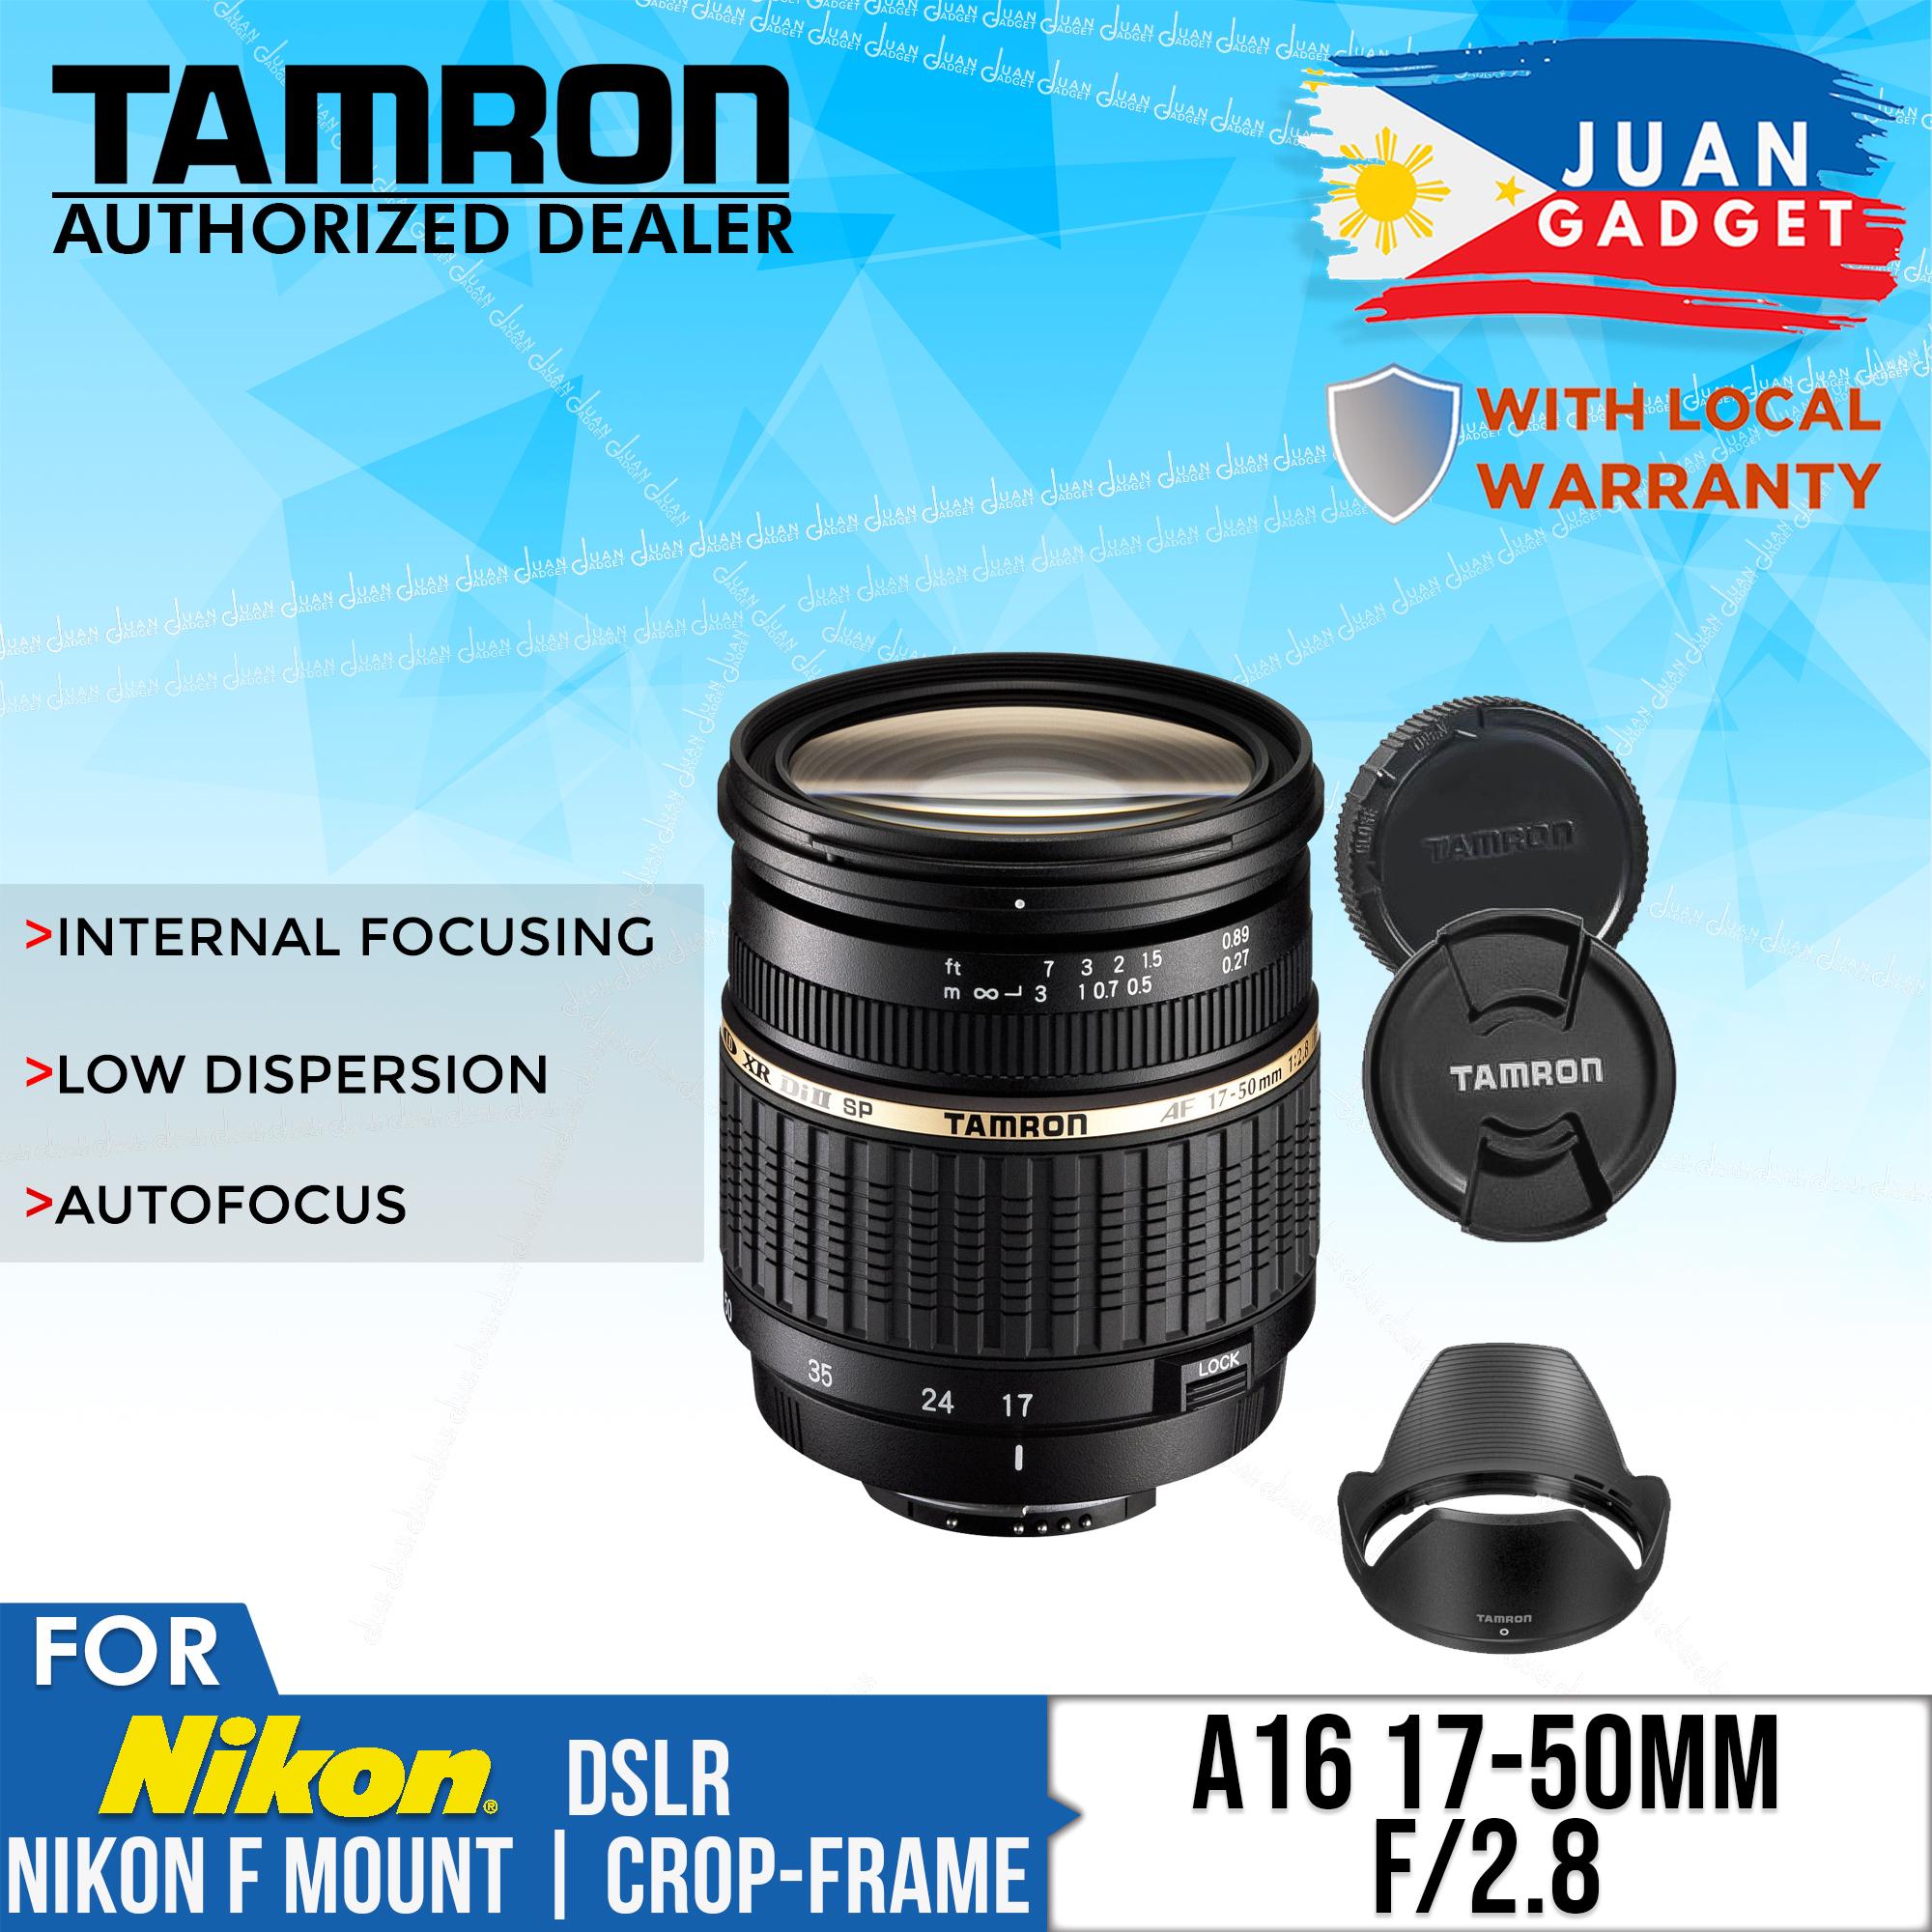 Tamron A16 SP 17-50mm f/2.8 Di II LD Aspherical [IF] Lens for